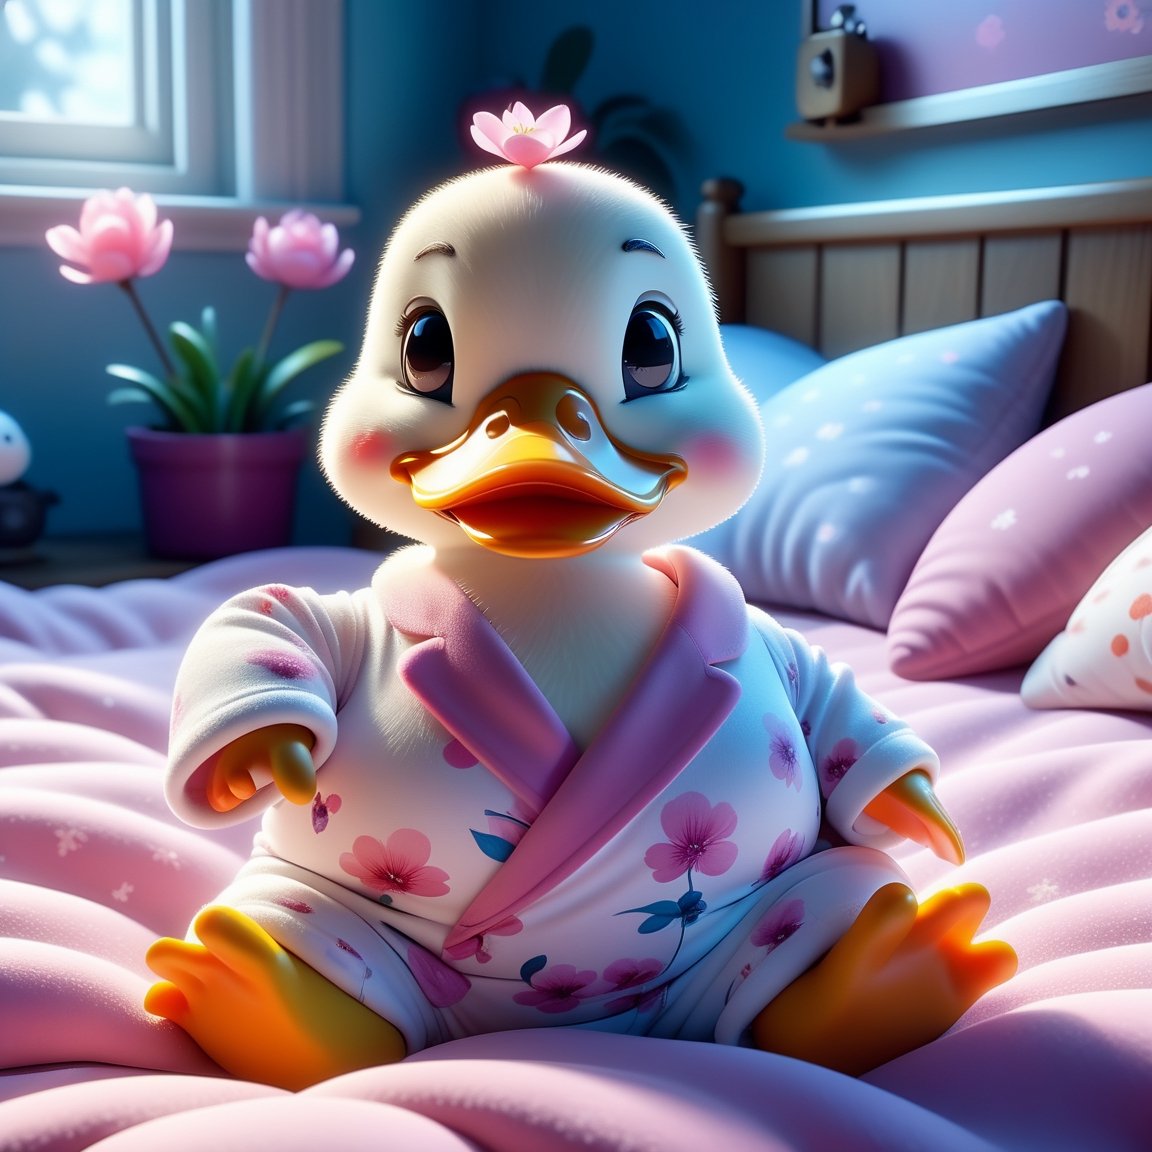 Pixar and Disney animation movie scene style, render style anime style, plum blooming, Cute chubby duck wearing pink and white pyjama, weaking up, lying on bed, Serene, Art Hoe, Detailed Painting, adorable and lovely, sleepy looking,🥱 GoPro view, Blender rendering, Sharp, 